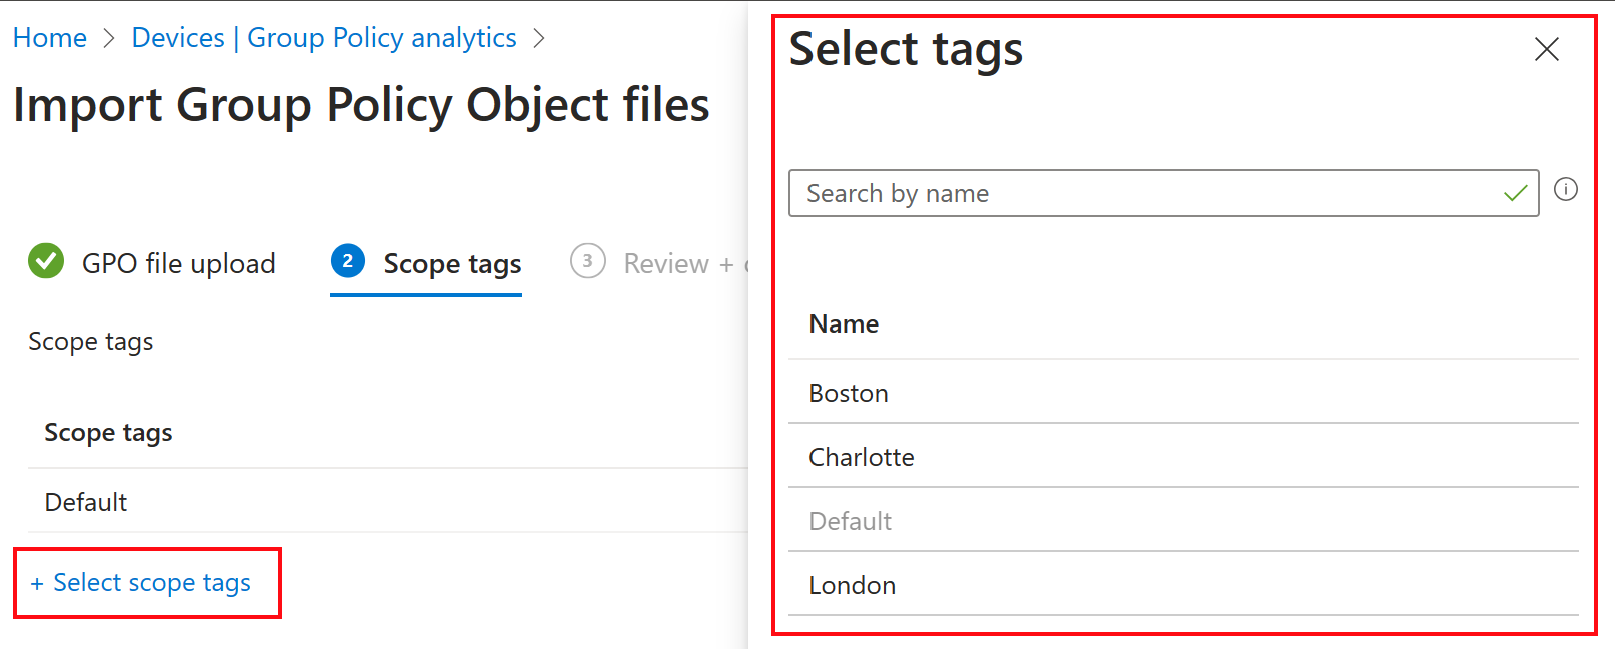 Screenshot that shows how to import a group policy object (GPO) and select a scope tag in Microsoft Intune and Intune admin center.